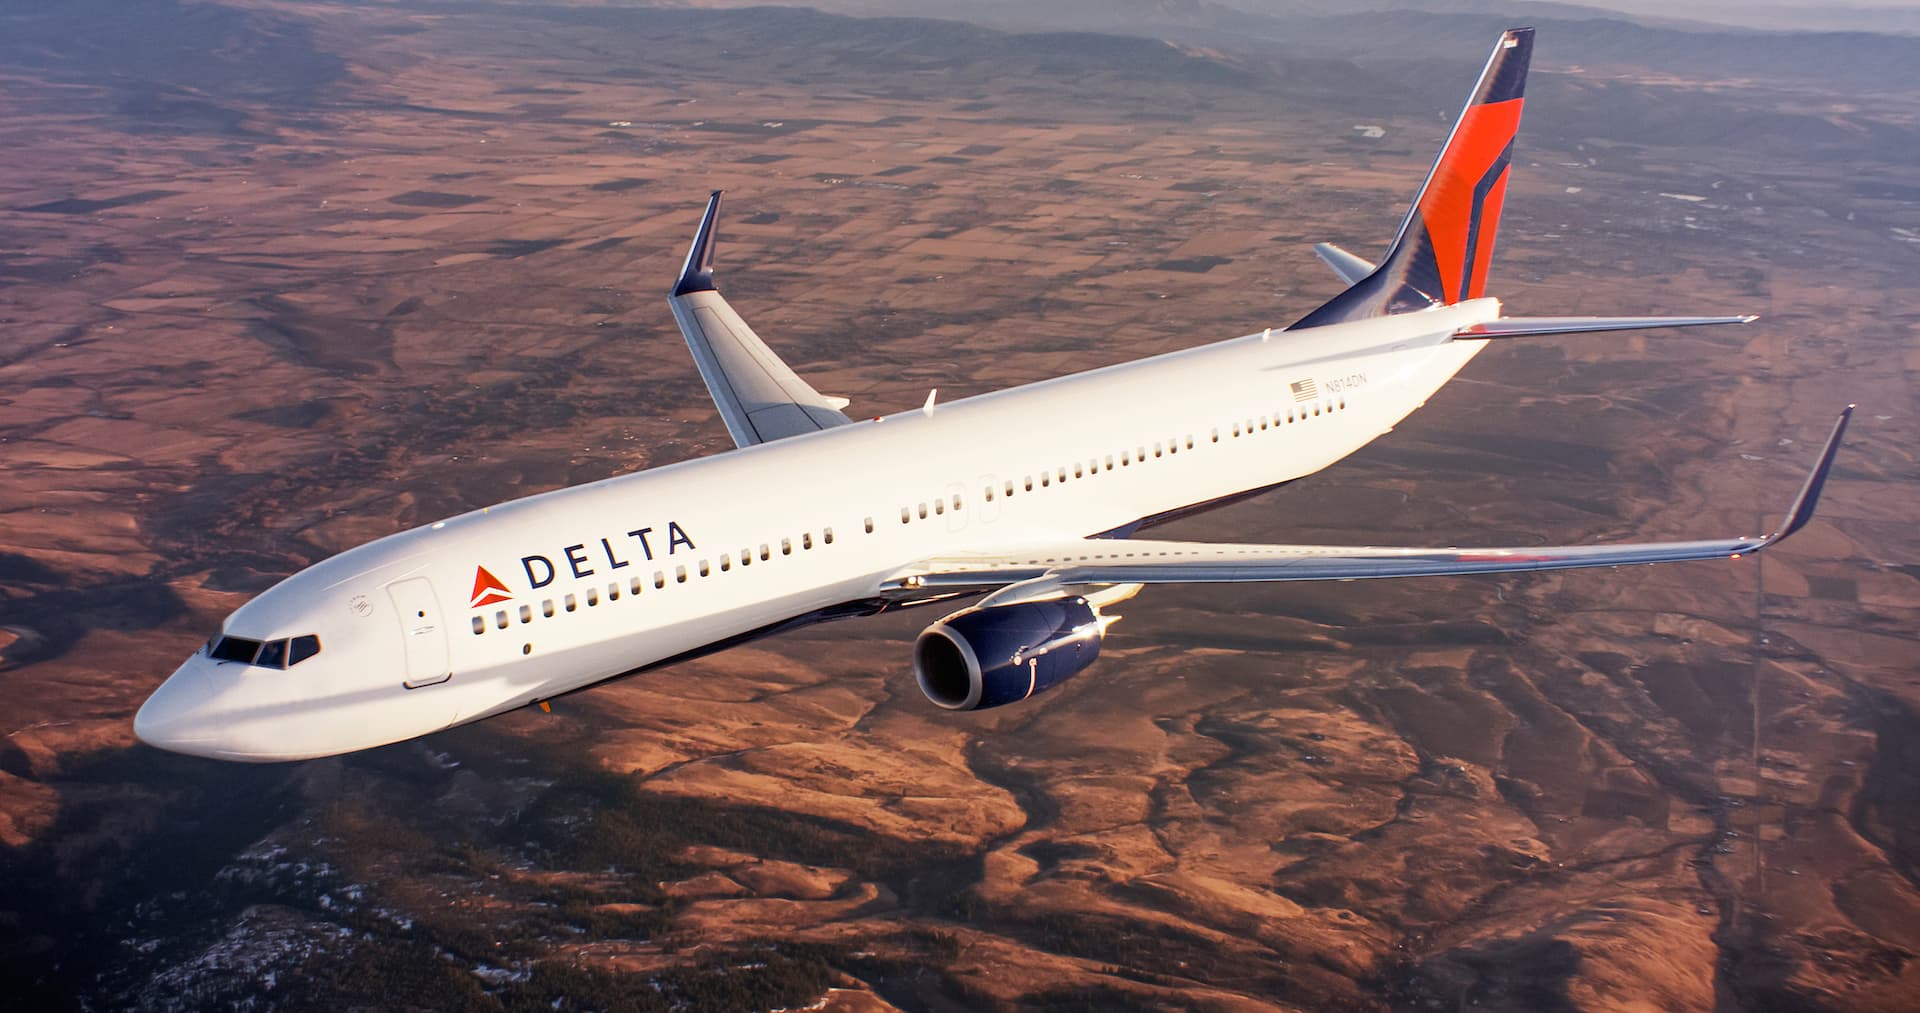 Delta Air Lines reveals strategy to move beyond fossil fuels